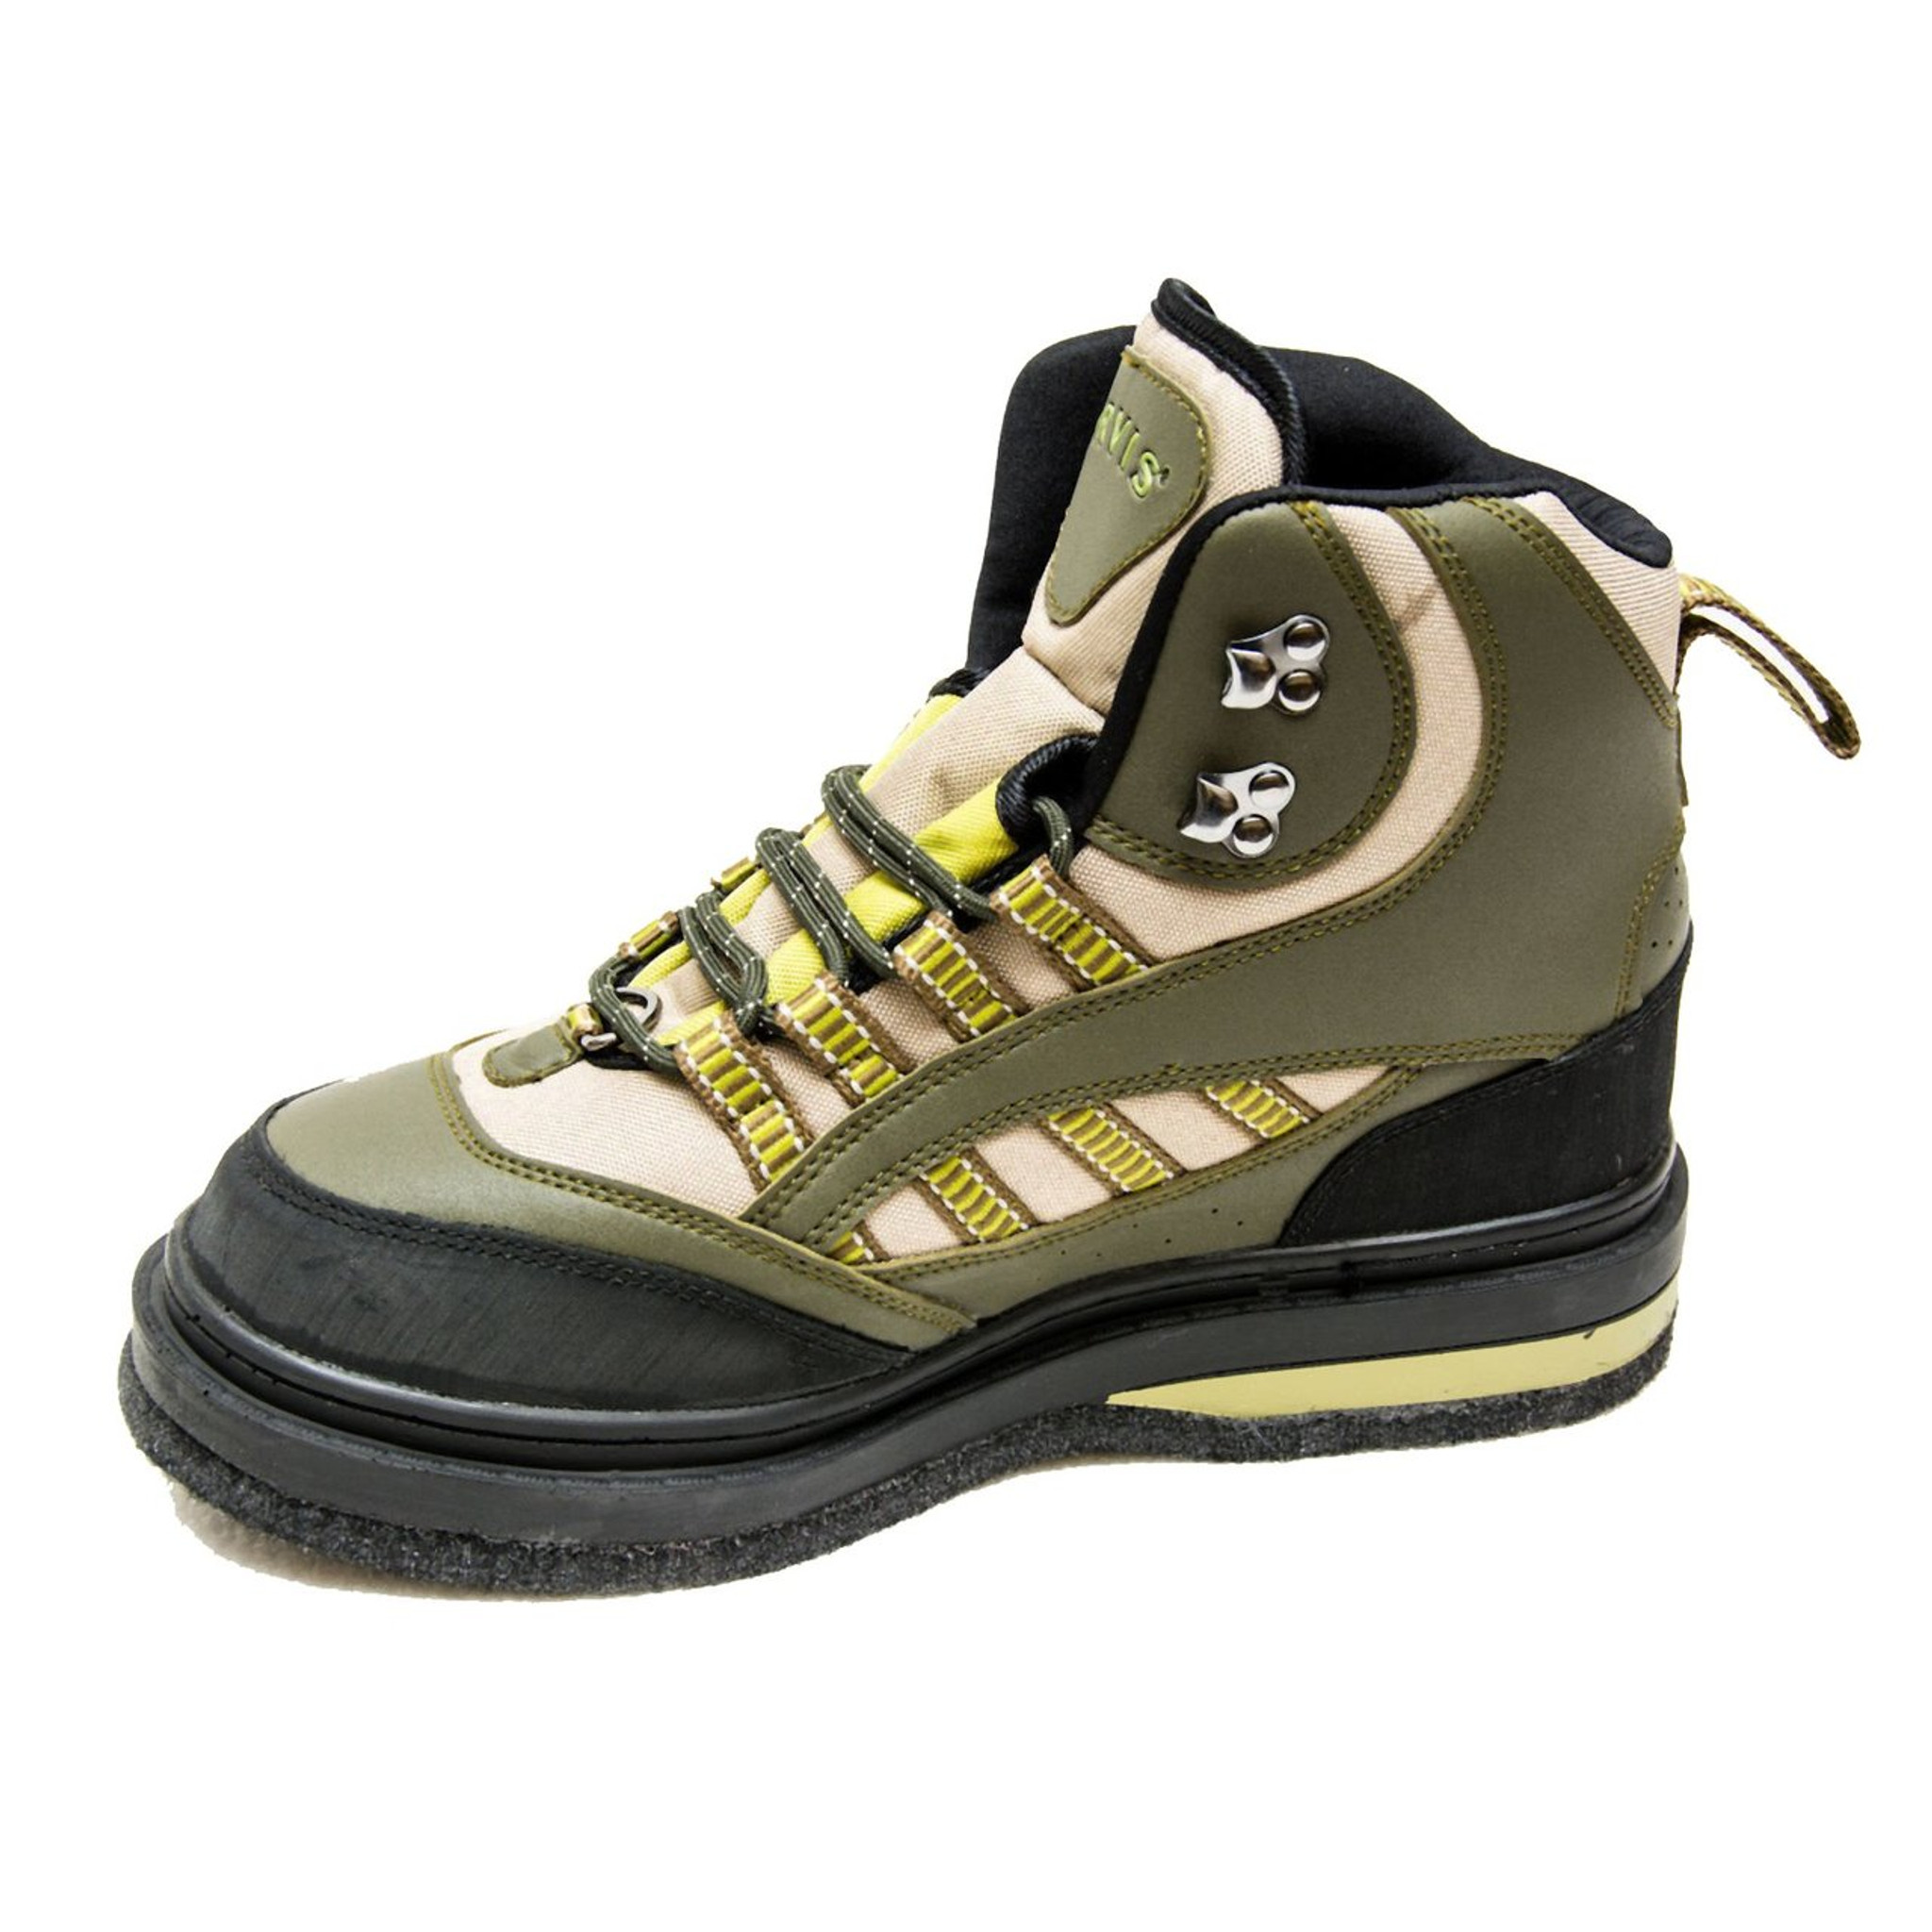 Orvis PRO Fly Fishing Wading Boots with BONUS Boot Bag